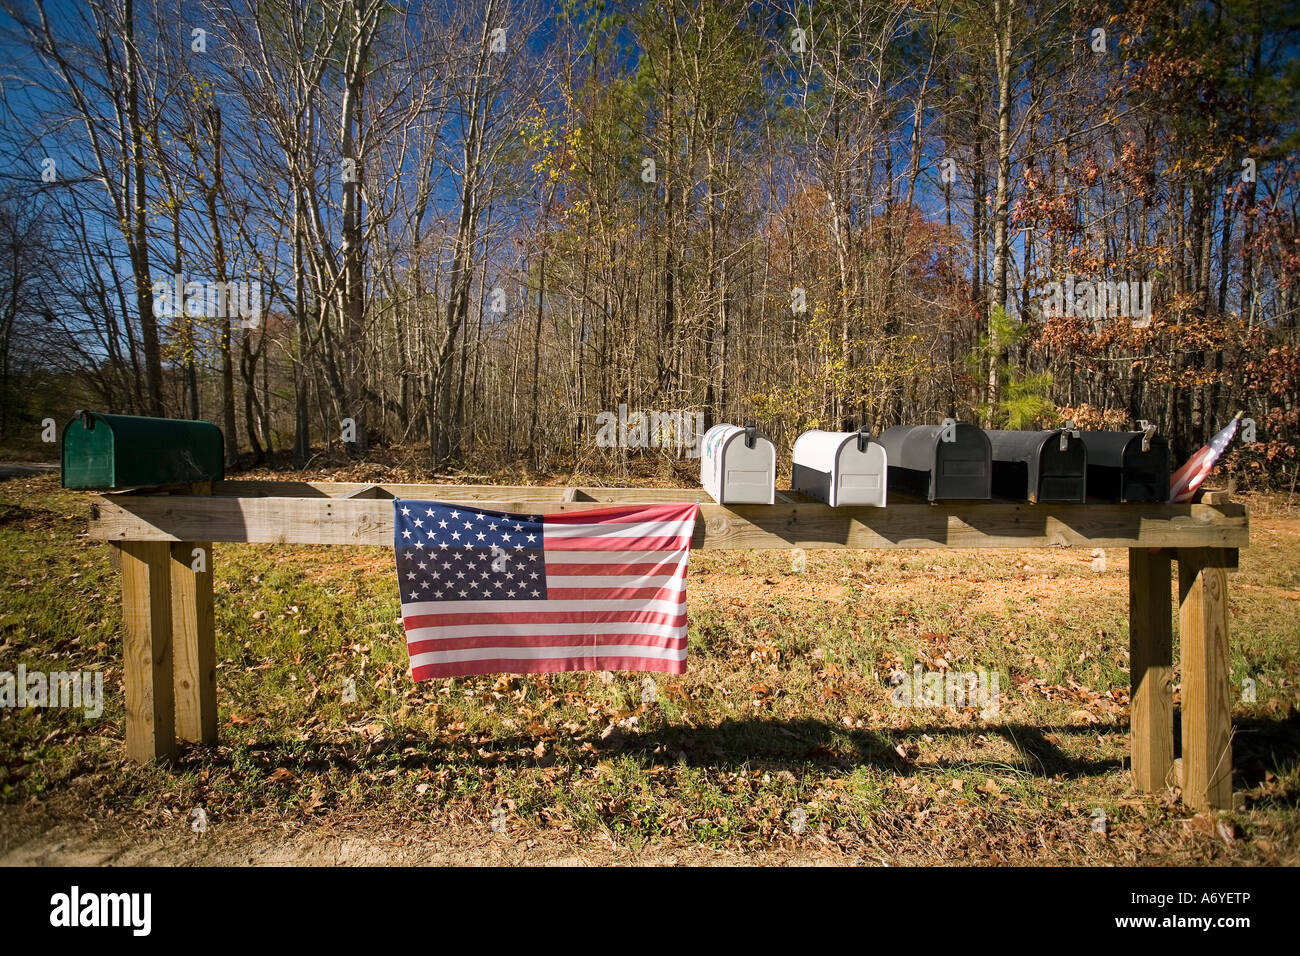 American flag hanging next to mailboxes Stock Photo